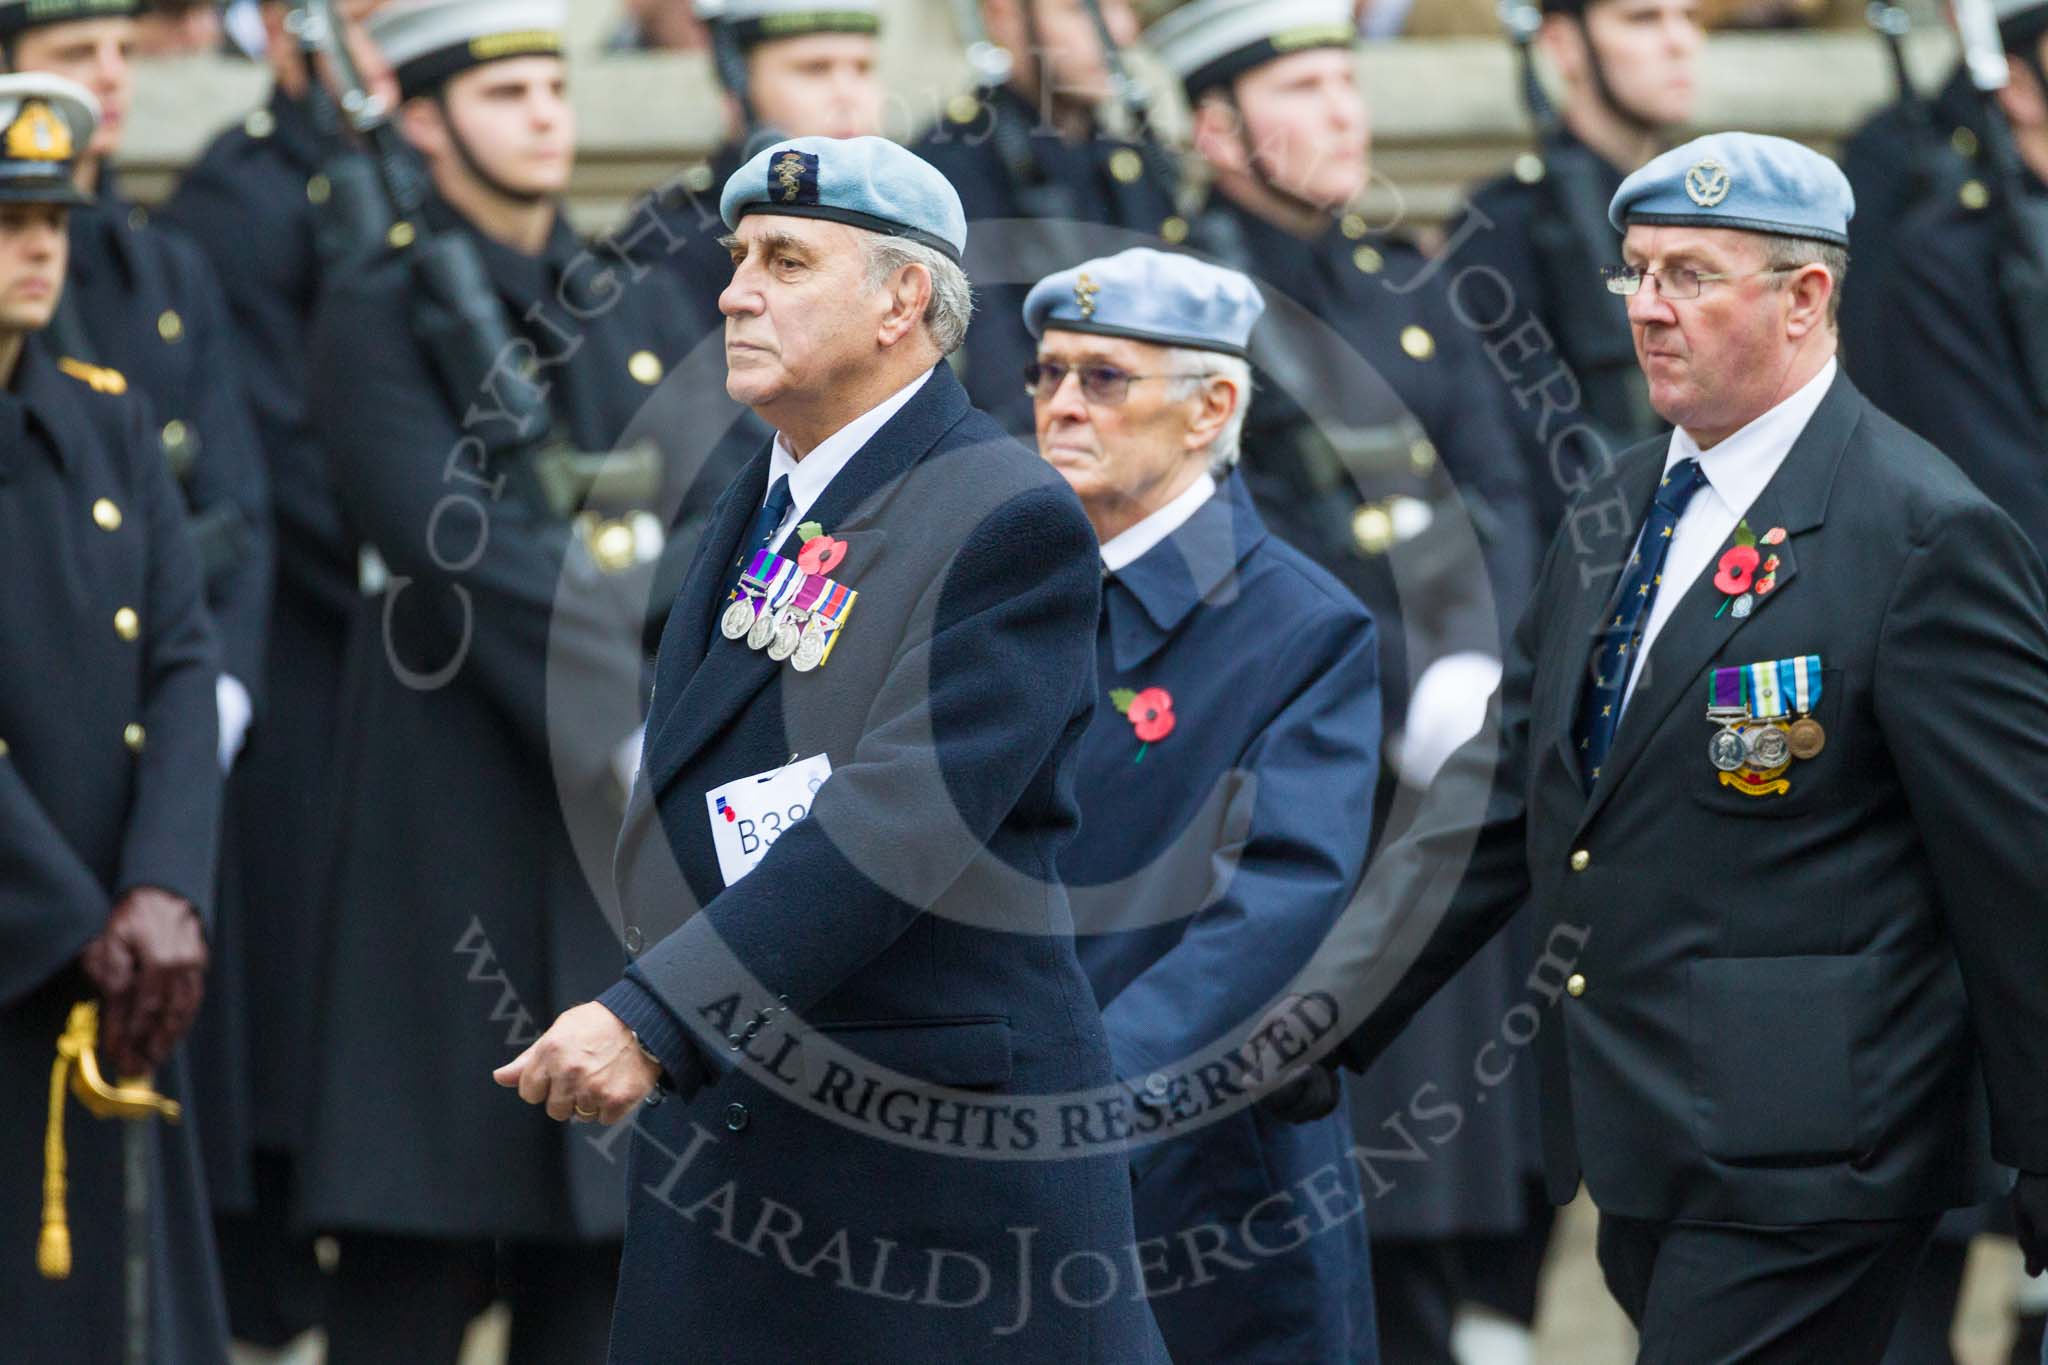 Remembrance Sunday at the Cenotaph 2015: Group B38, 656 Squadron Association.
Cenotaph, Whitehall, London SW1,
London,
Greater London,
United Kingdom,
on 08 November 2015 at 11:43, image #301